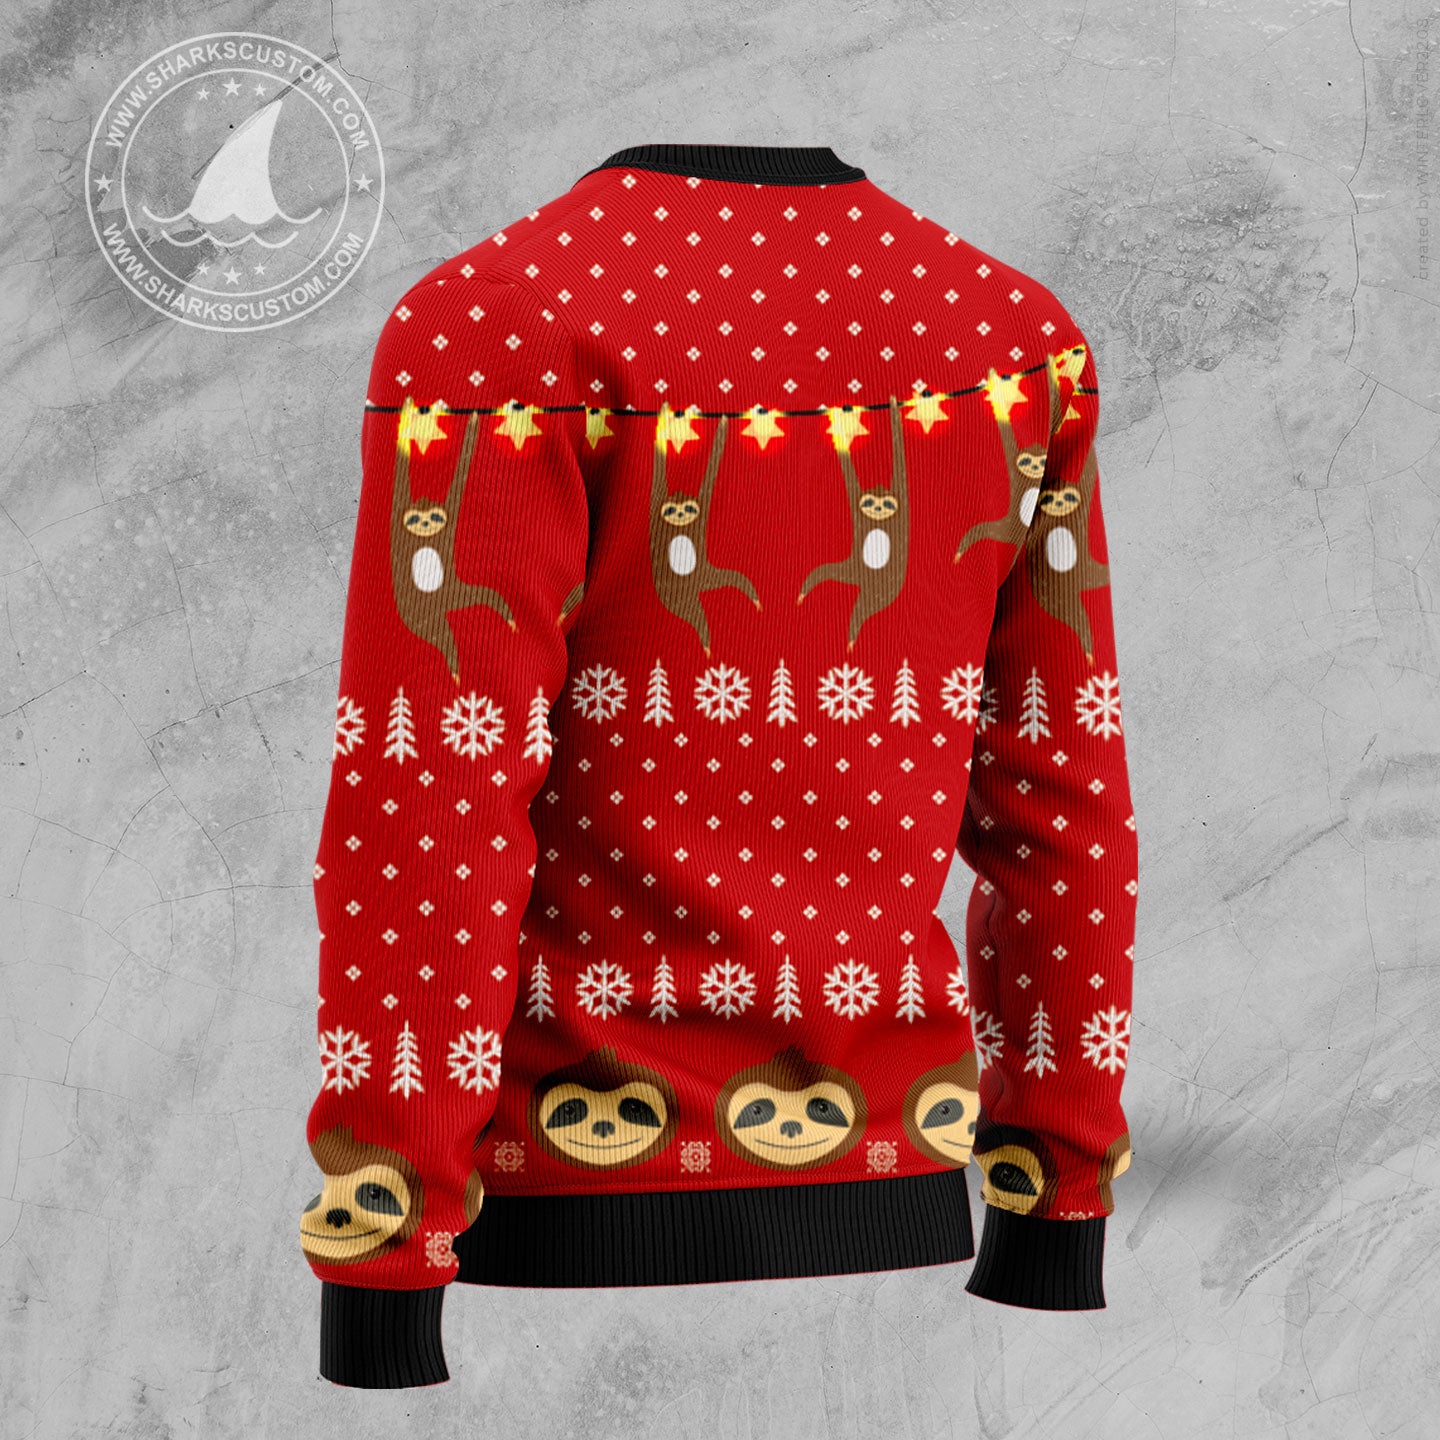 Sloth Lover HZ92412 Ugly Christmas Sweater unisex womens & mens, couples matching, friends, funny family sweater gifts (plus size available)